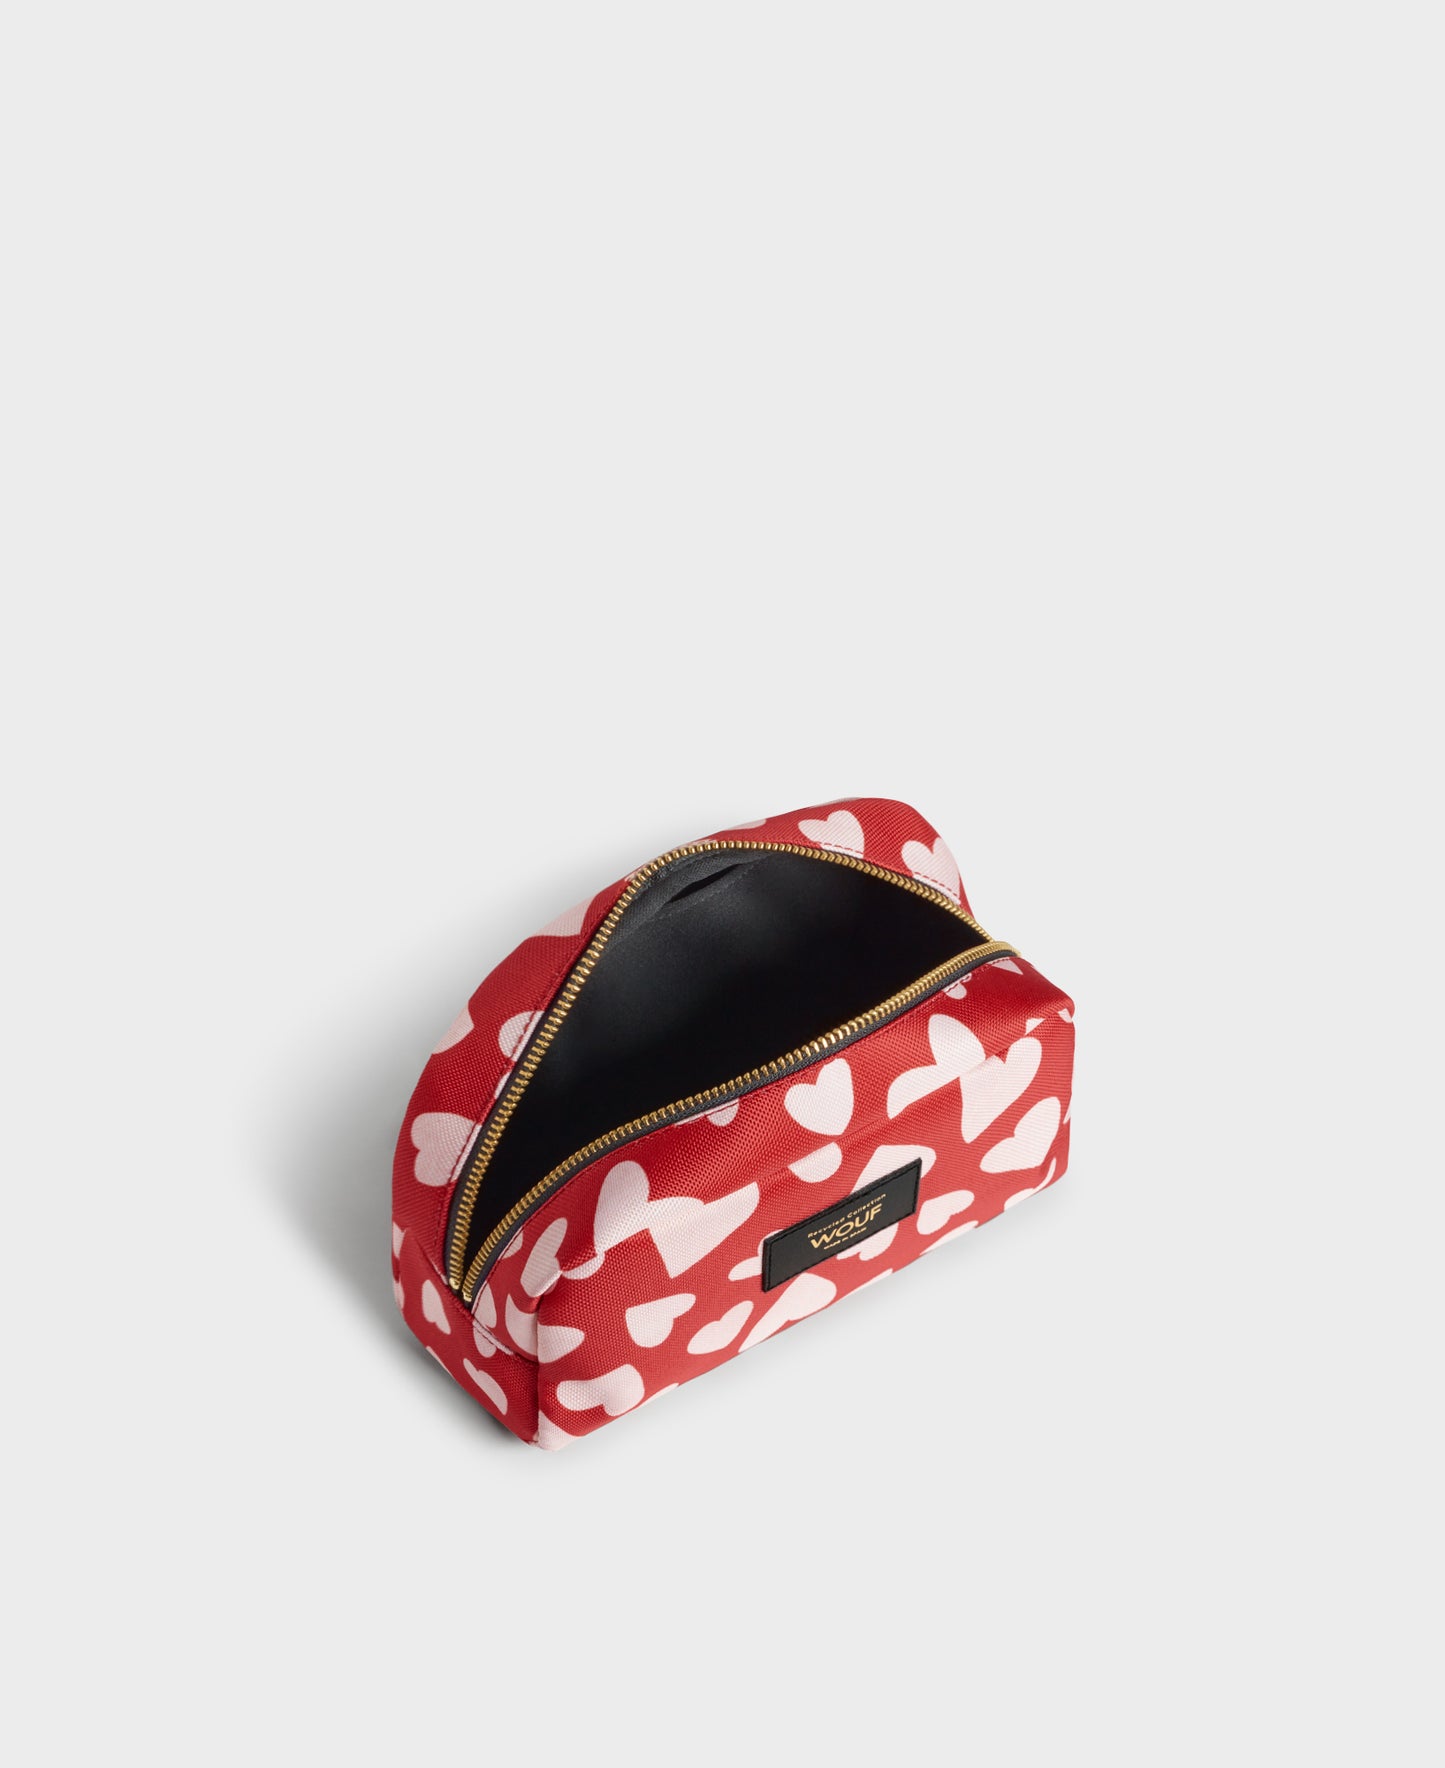 Amore Toiletry Bag